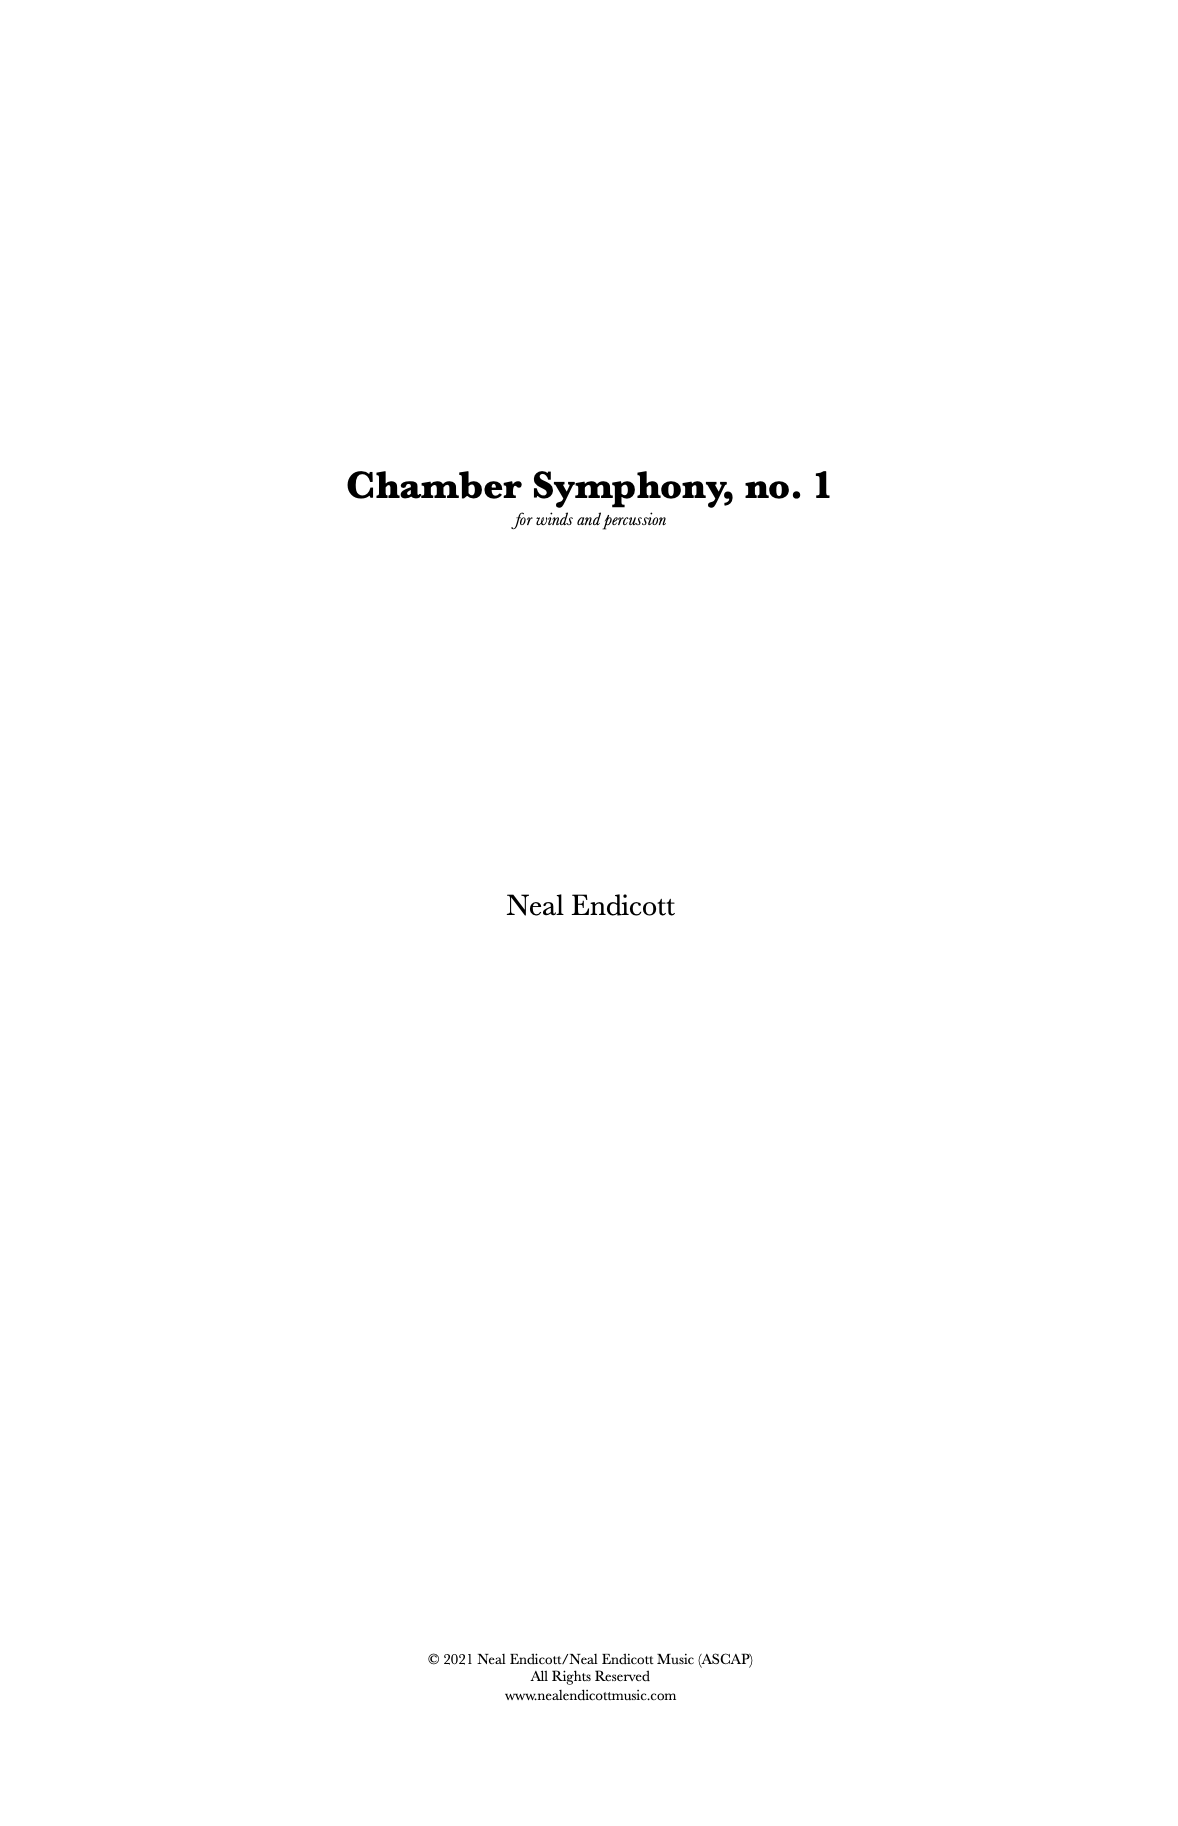 Chamber Symphony No. 1 by Neal Endicott